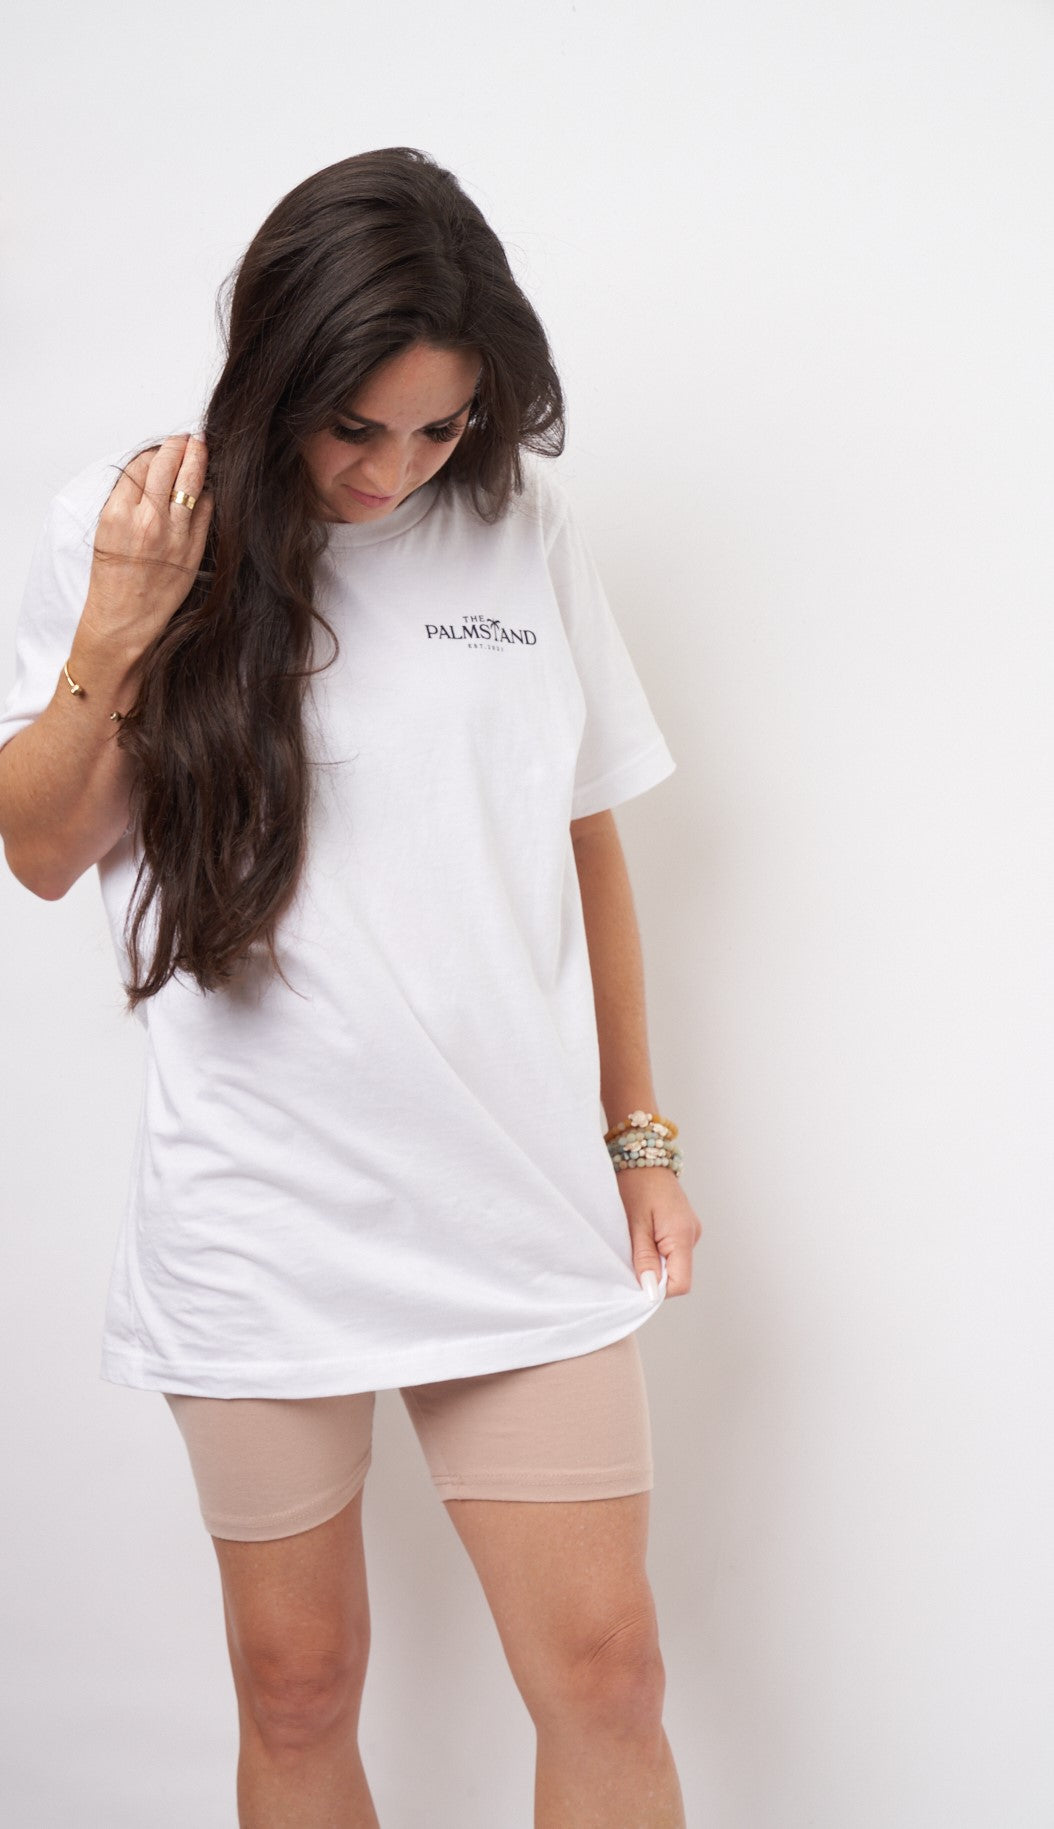 The PalmStand Classic Tee